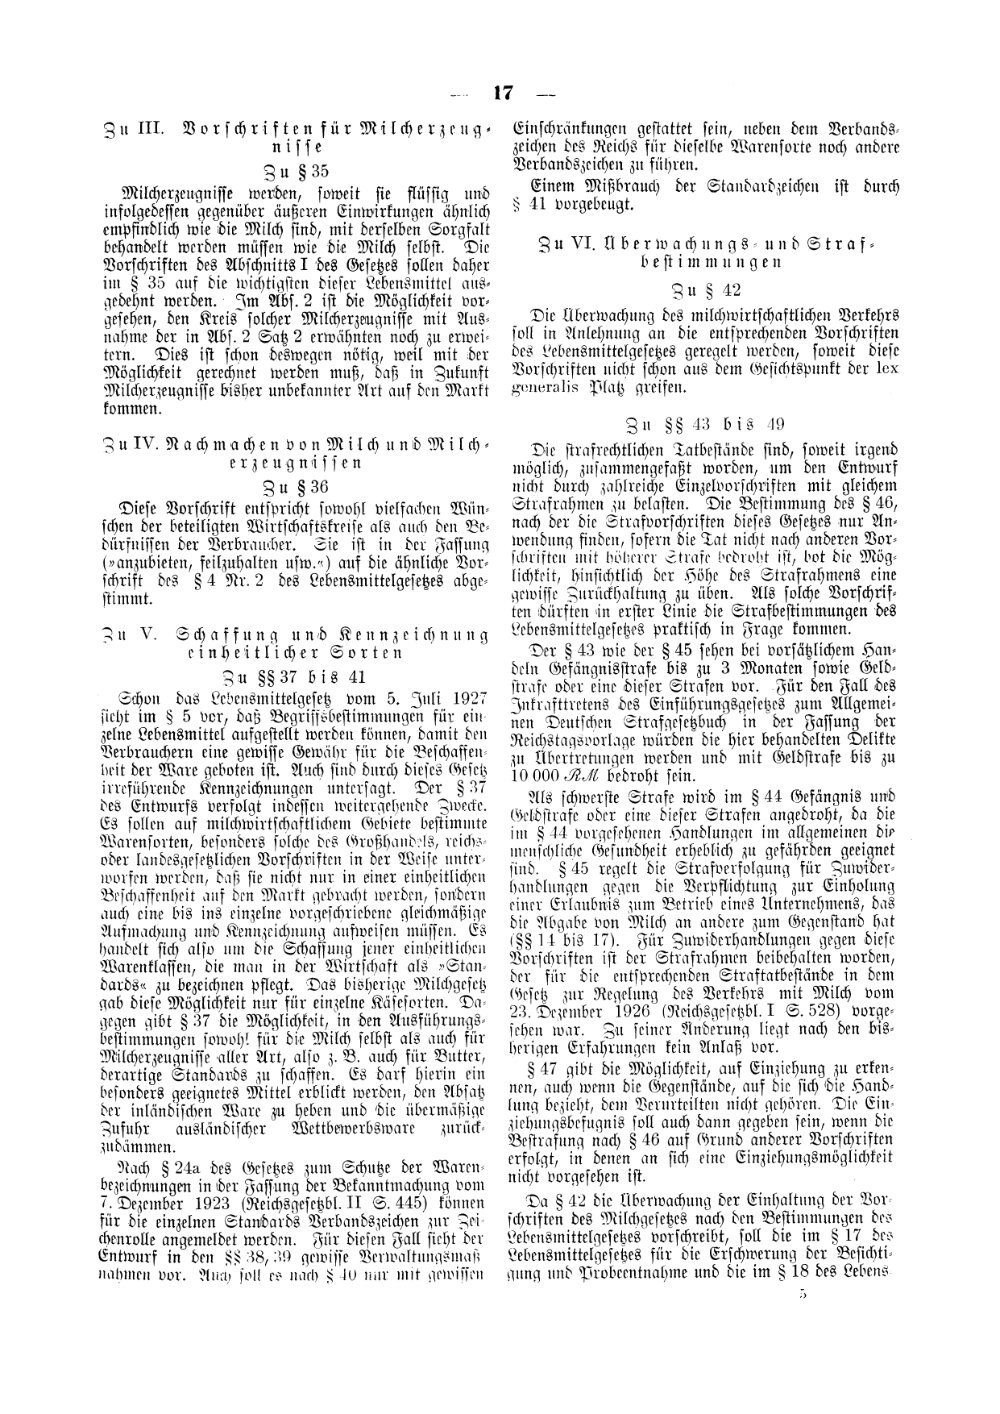 Scan of page 17